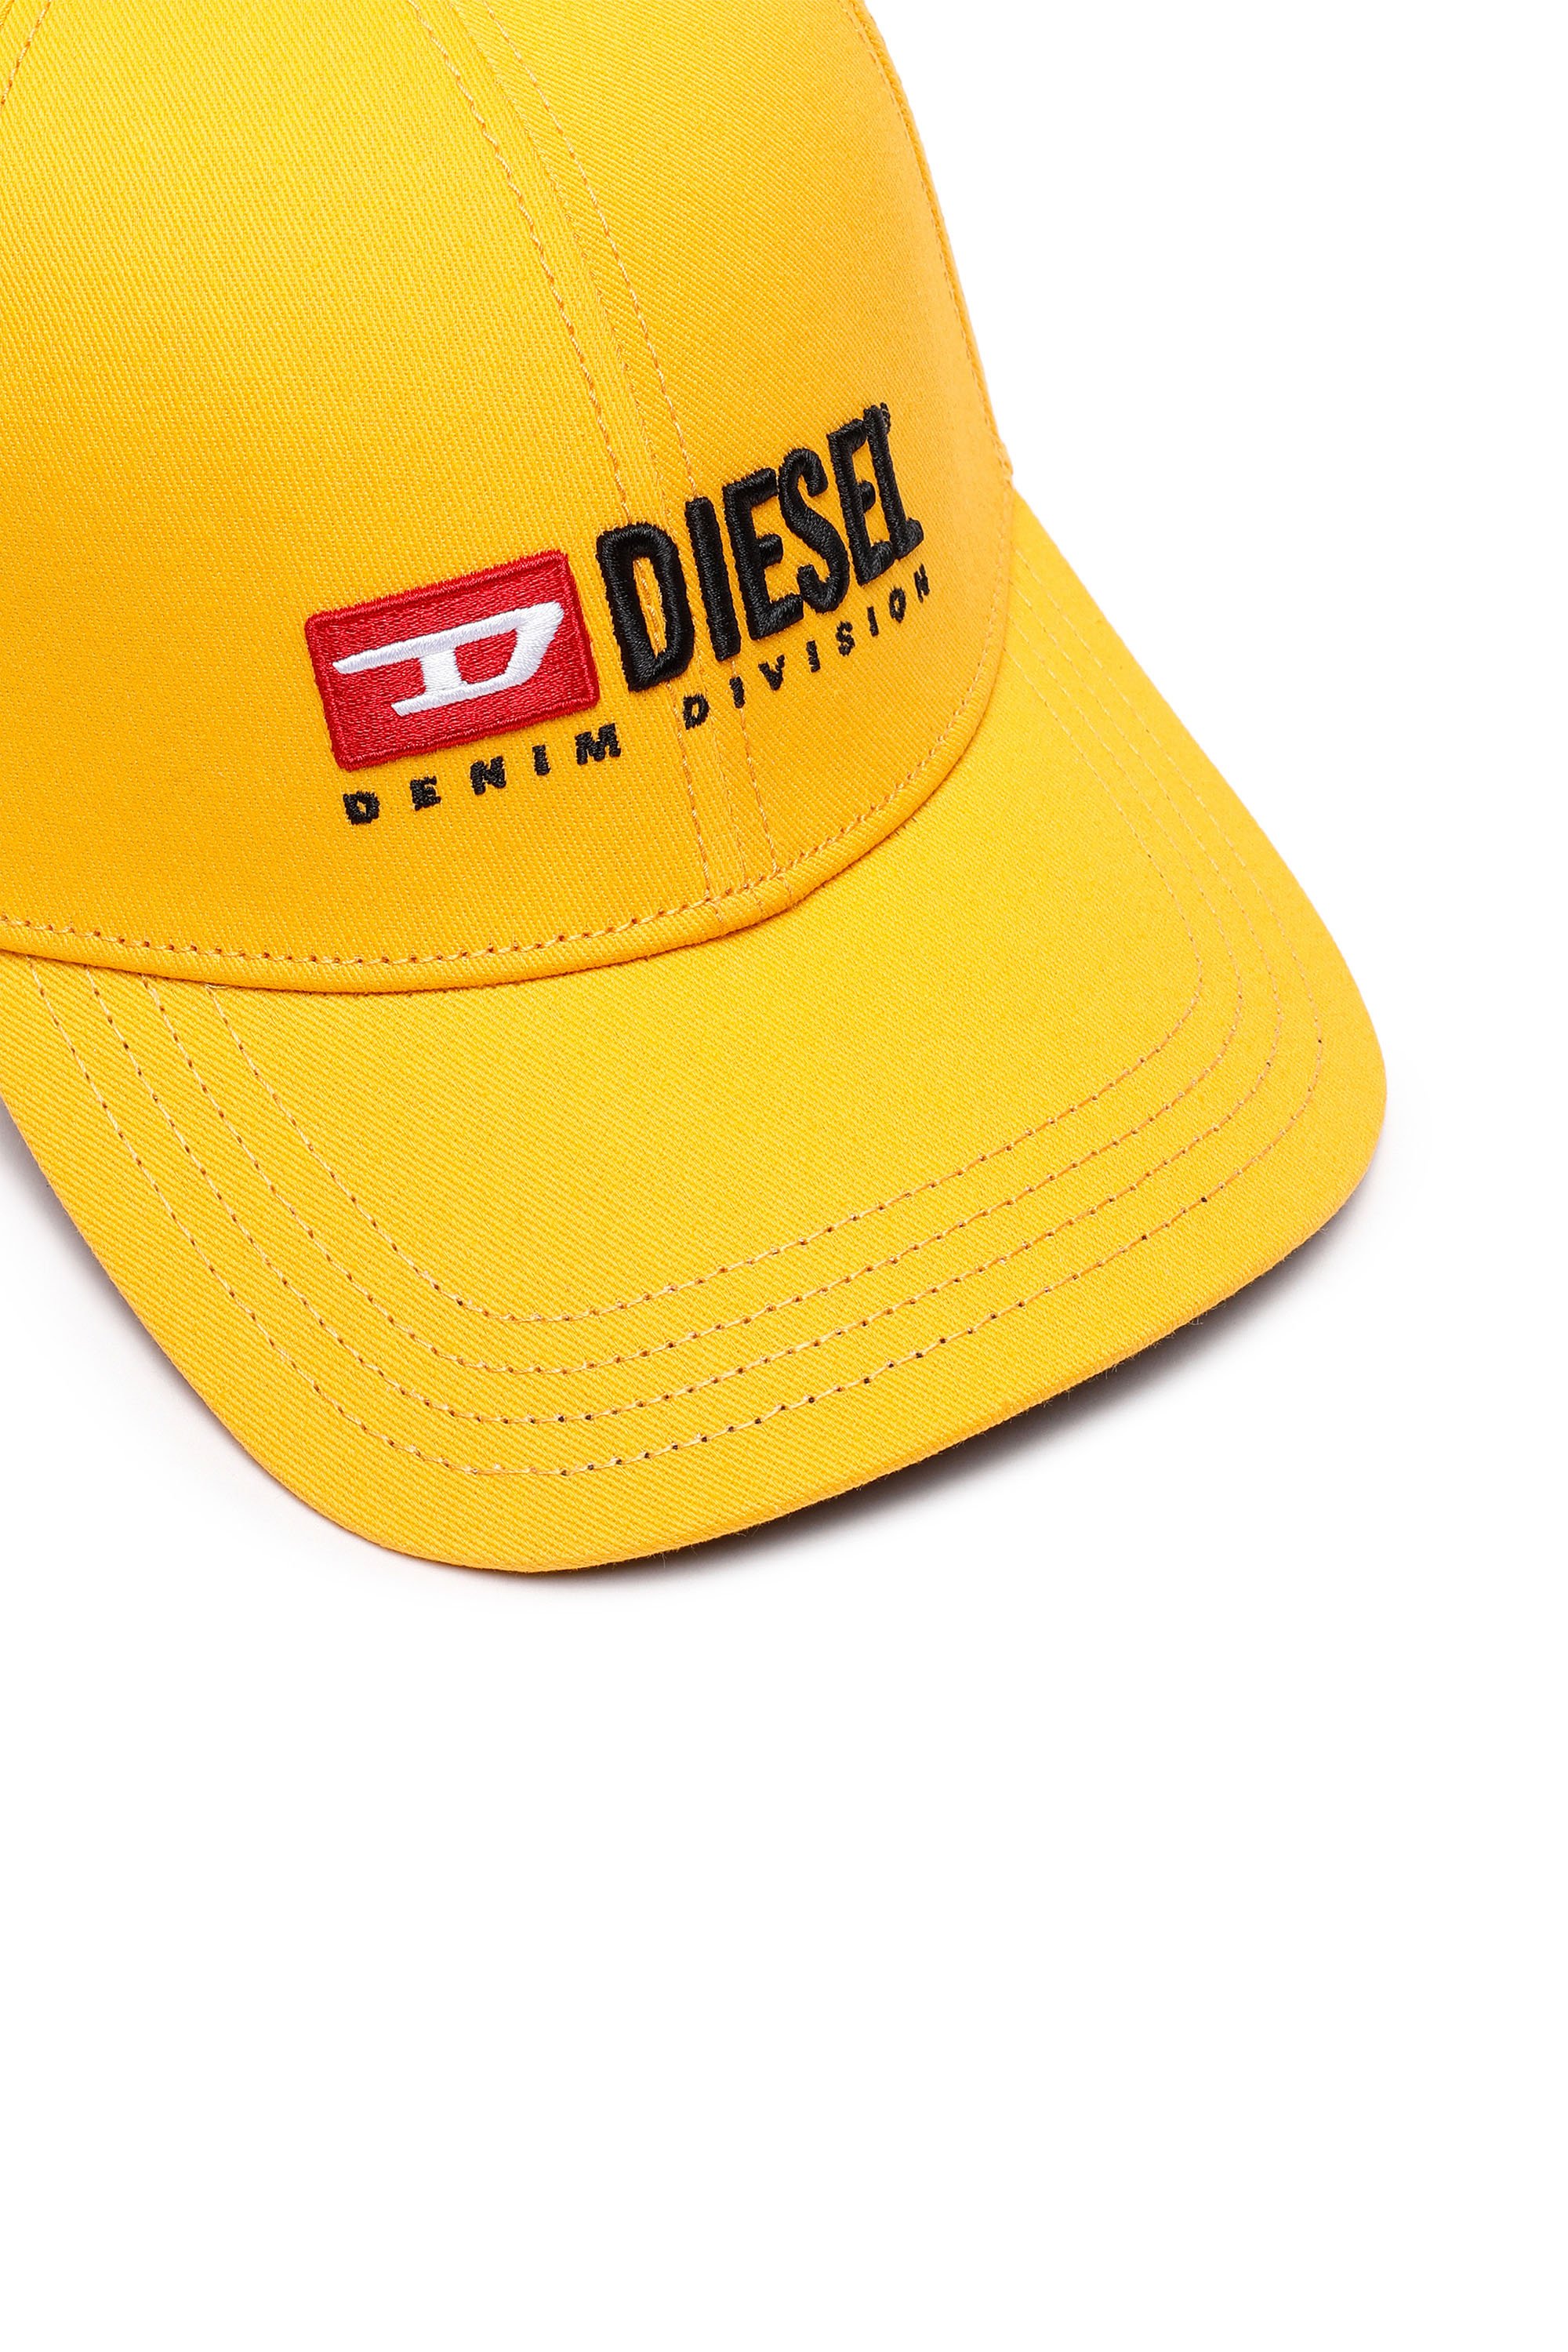 Diesel - CORRY-DIV, Yellow - Image 3